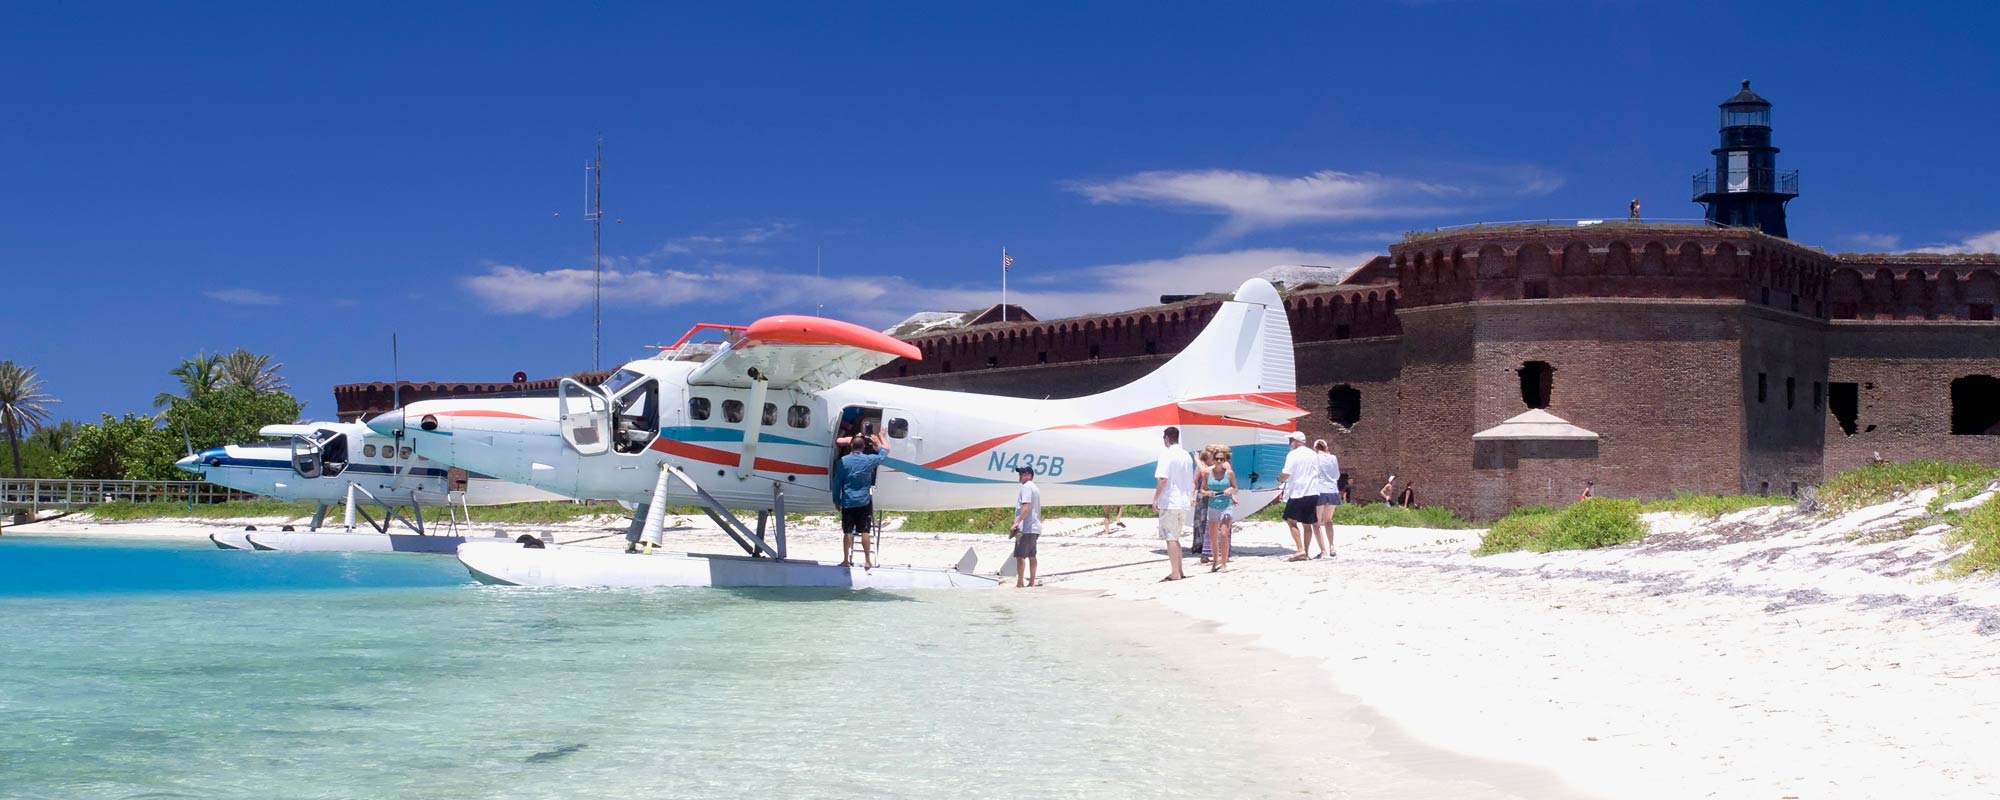 Seaplane ready for take-off in Gulf of Mexico